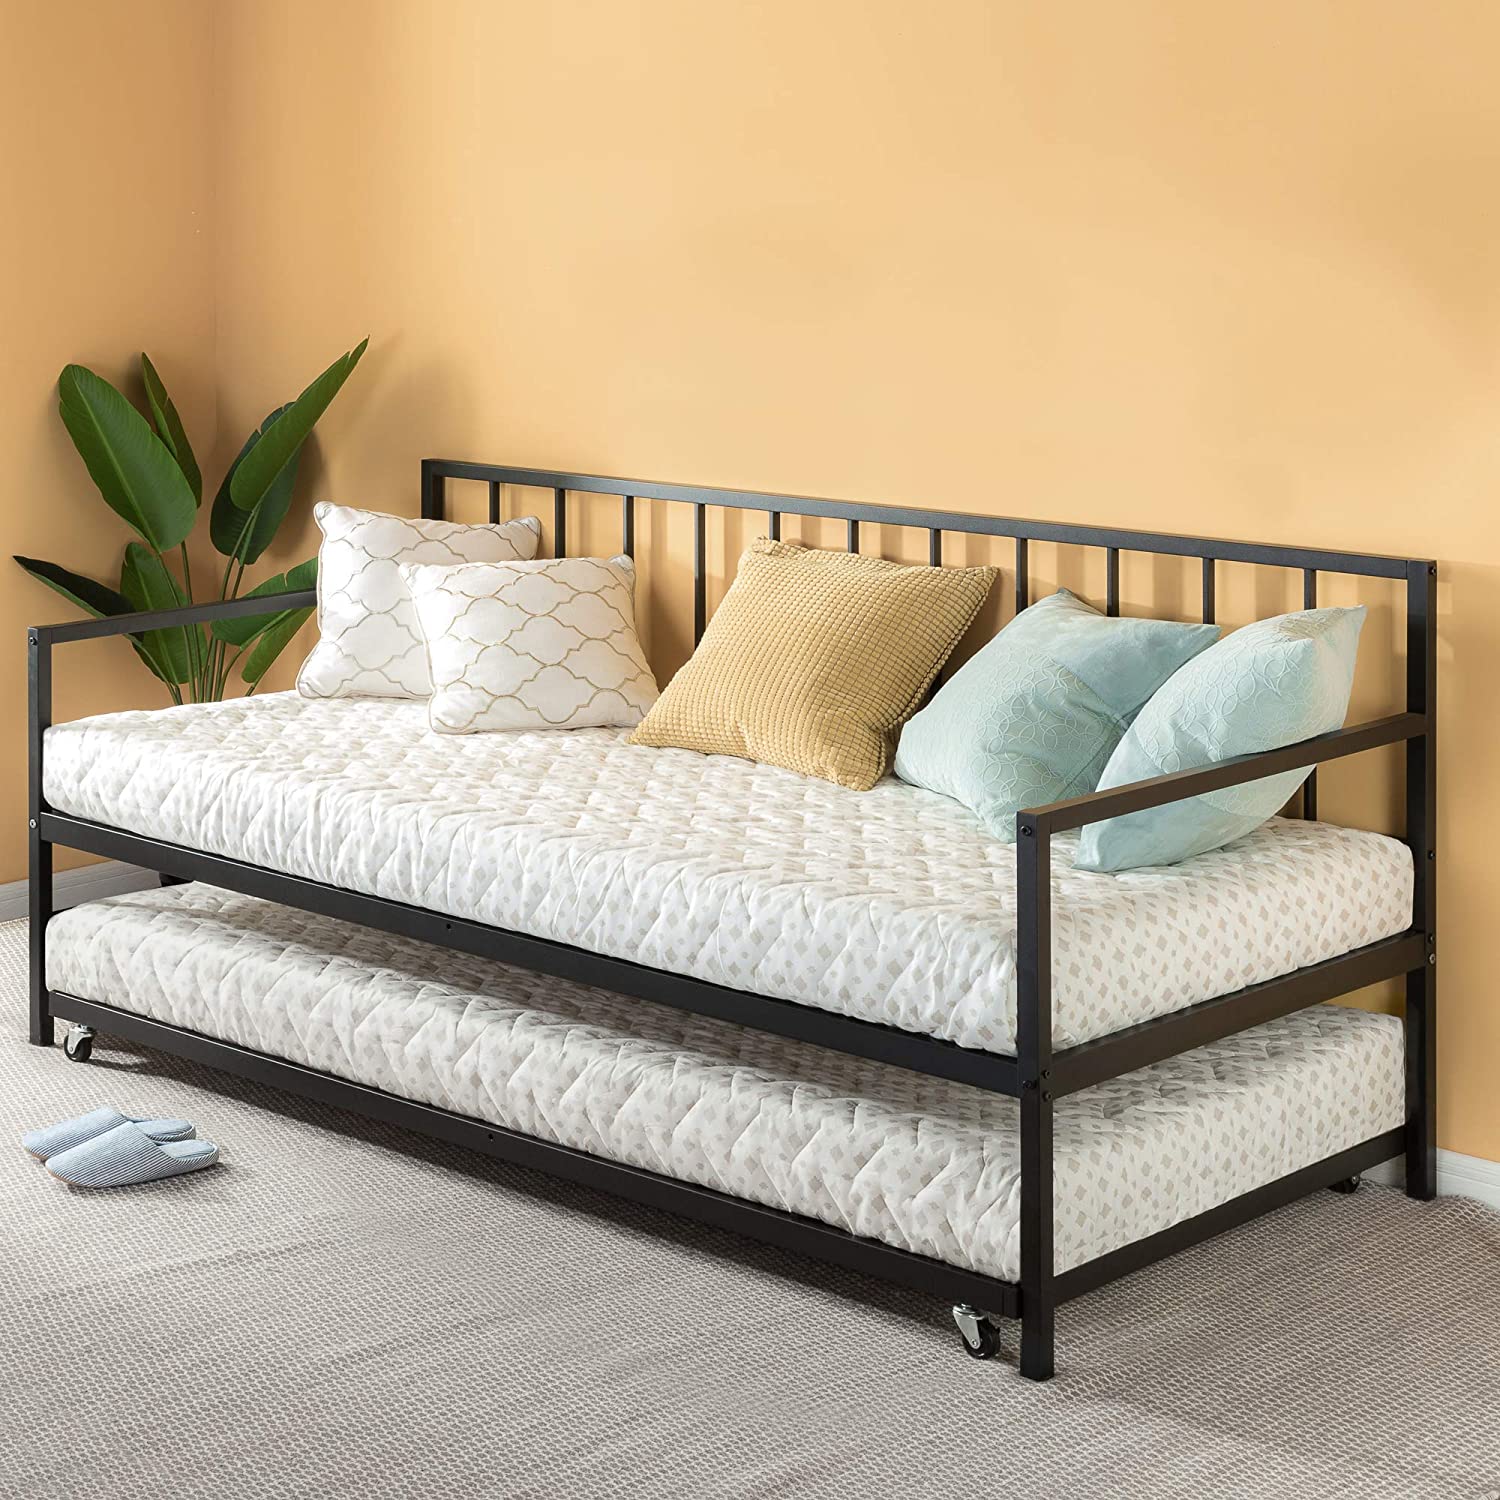 1. Zinus Eden Twin Daybed and Trundle Set